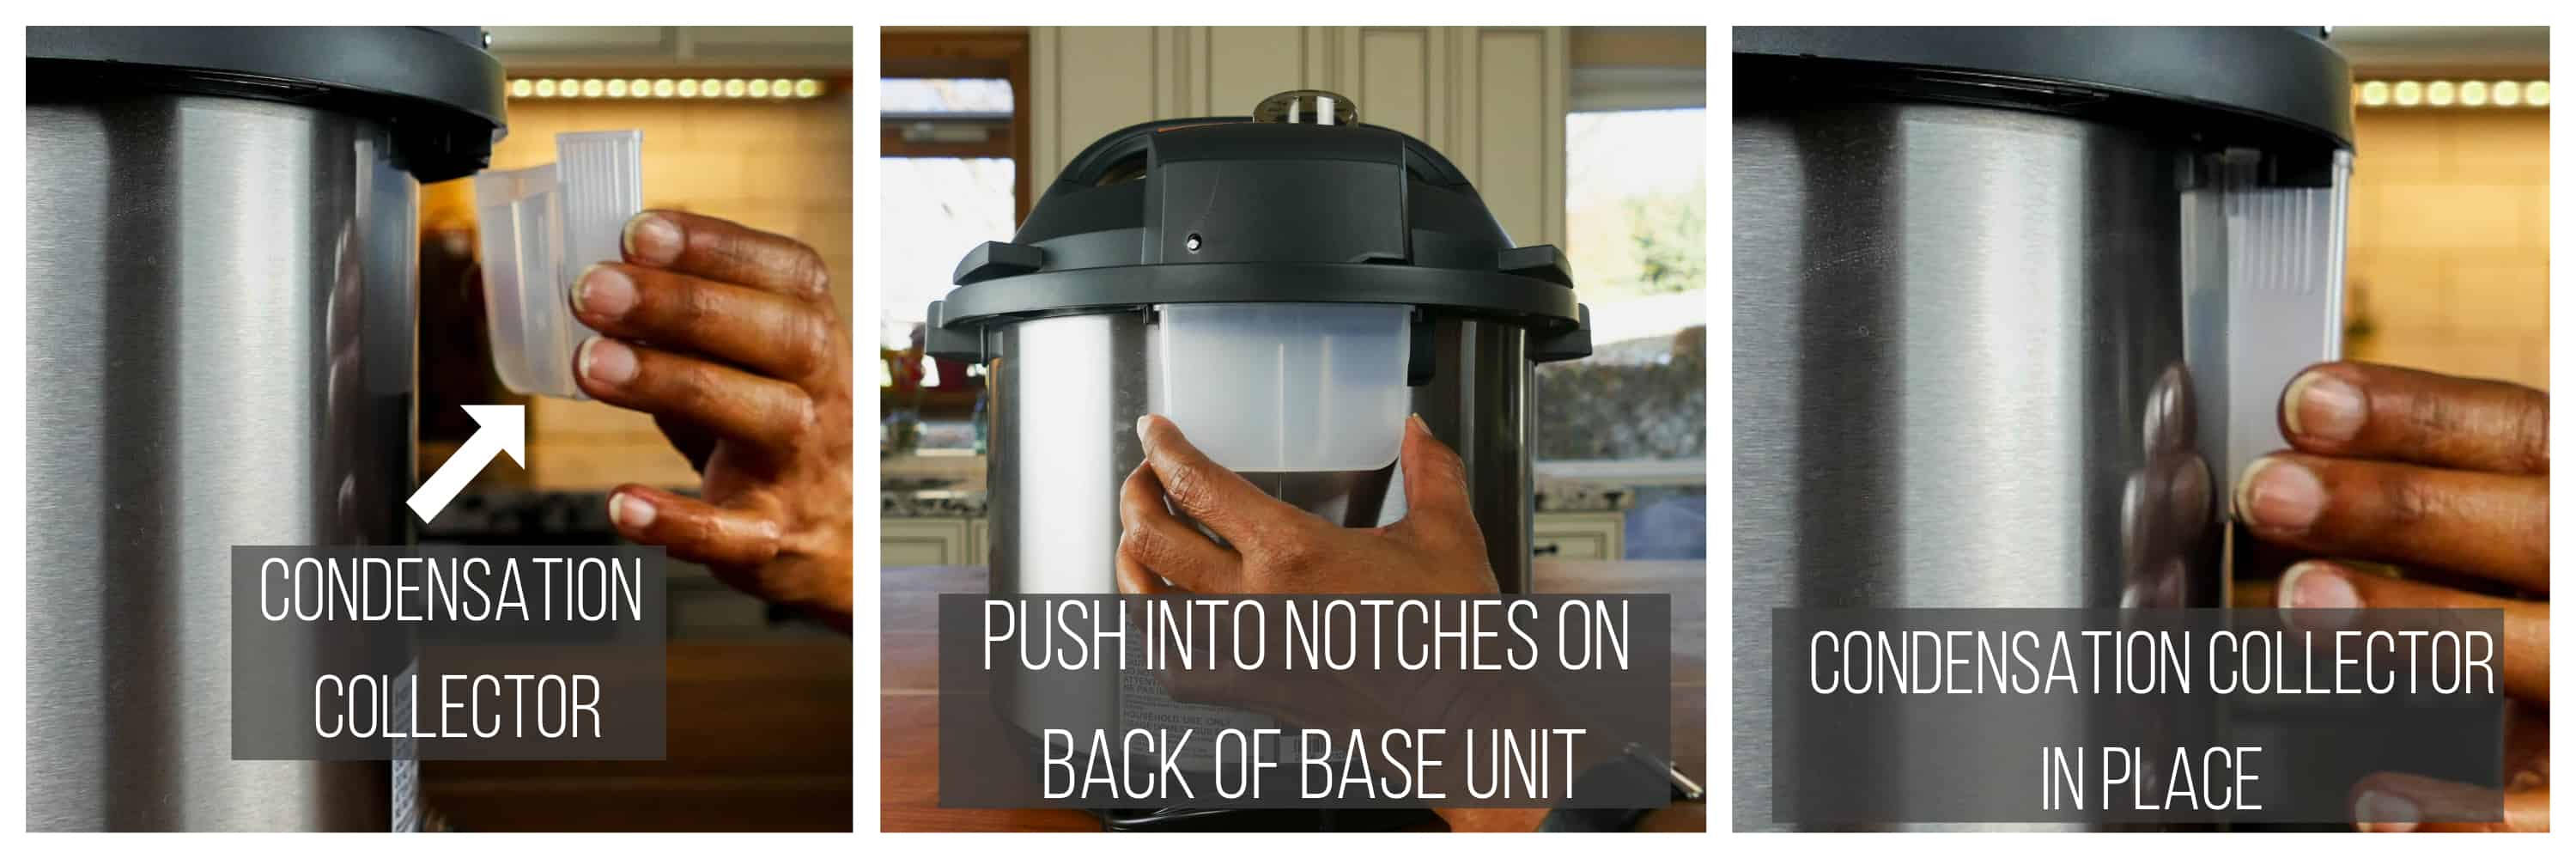 Instant Pot Pro collage - push condensation collector into notches on back of base unit until pushed in all the way - Paint the Kitchen Red